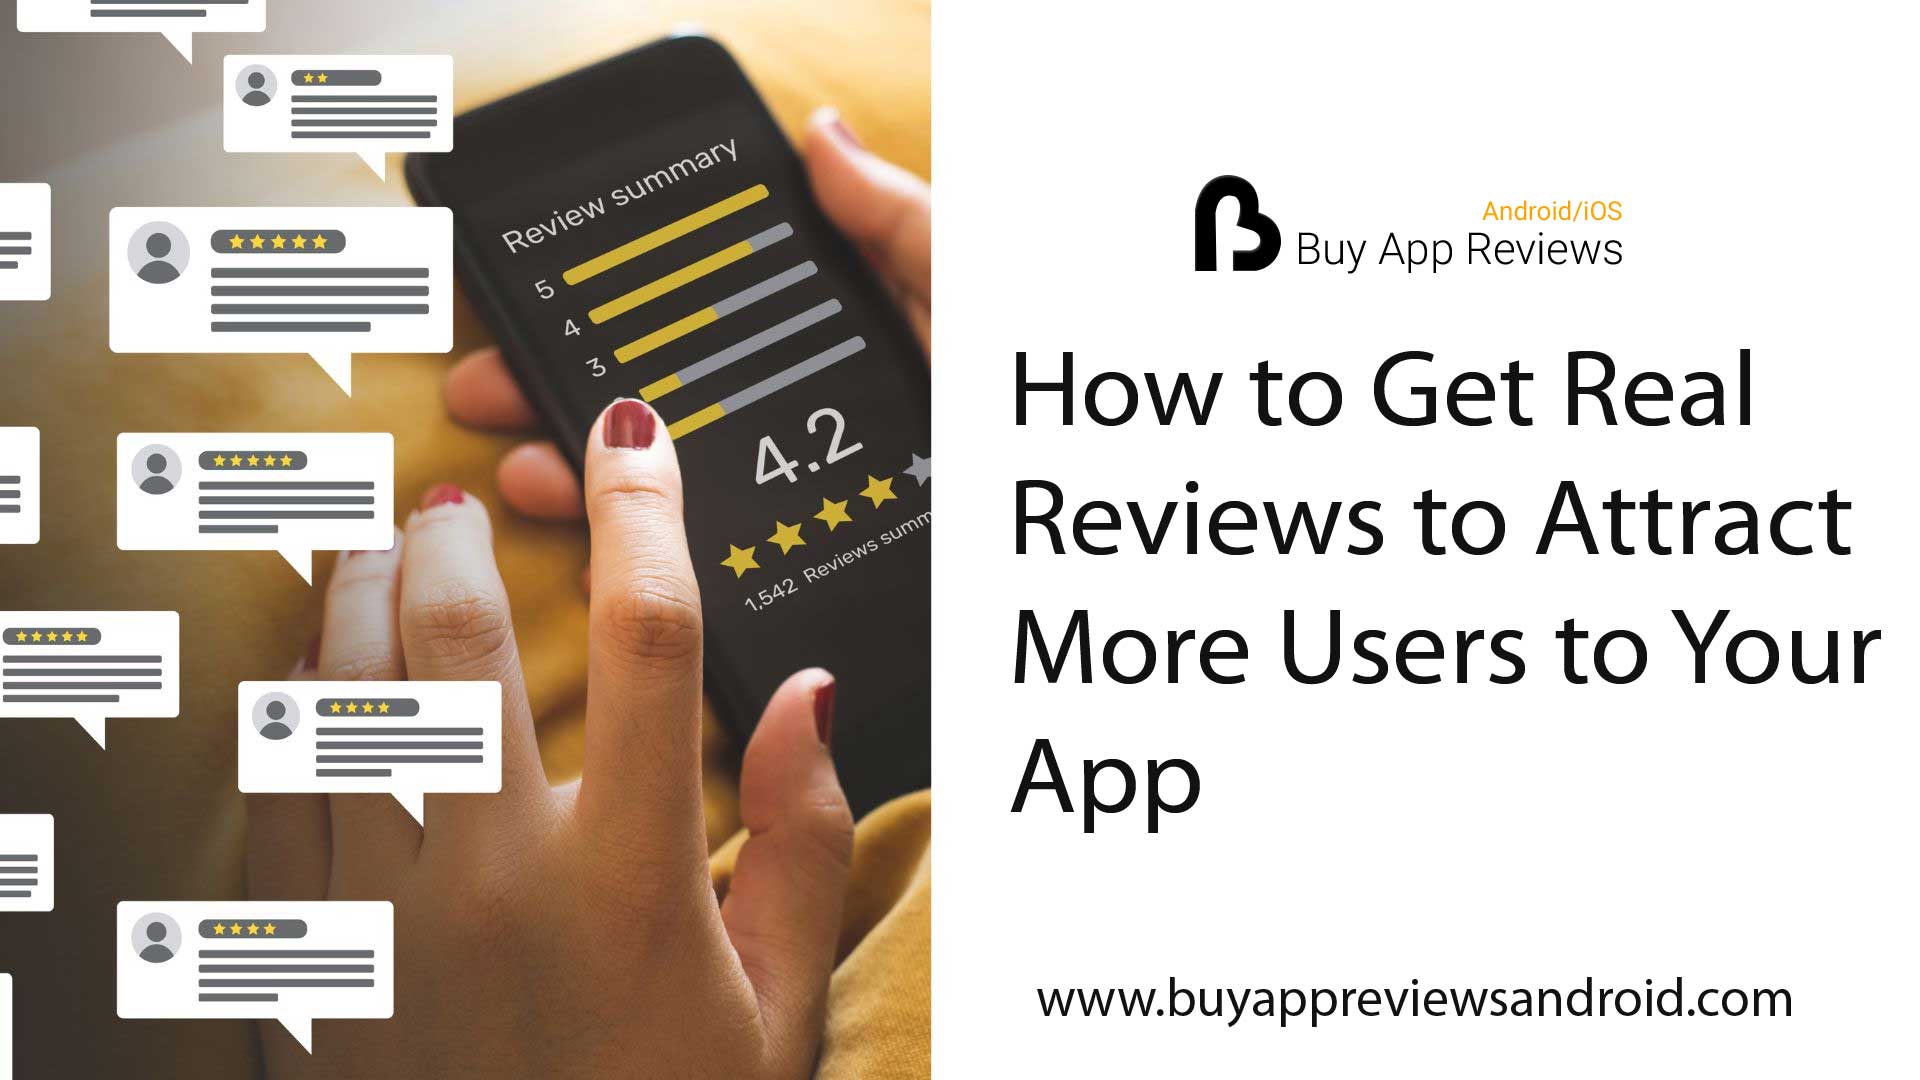 How to Get Real Reviews to Attract More Users to Your App